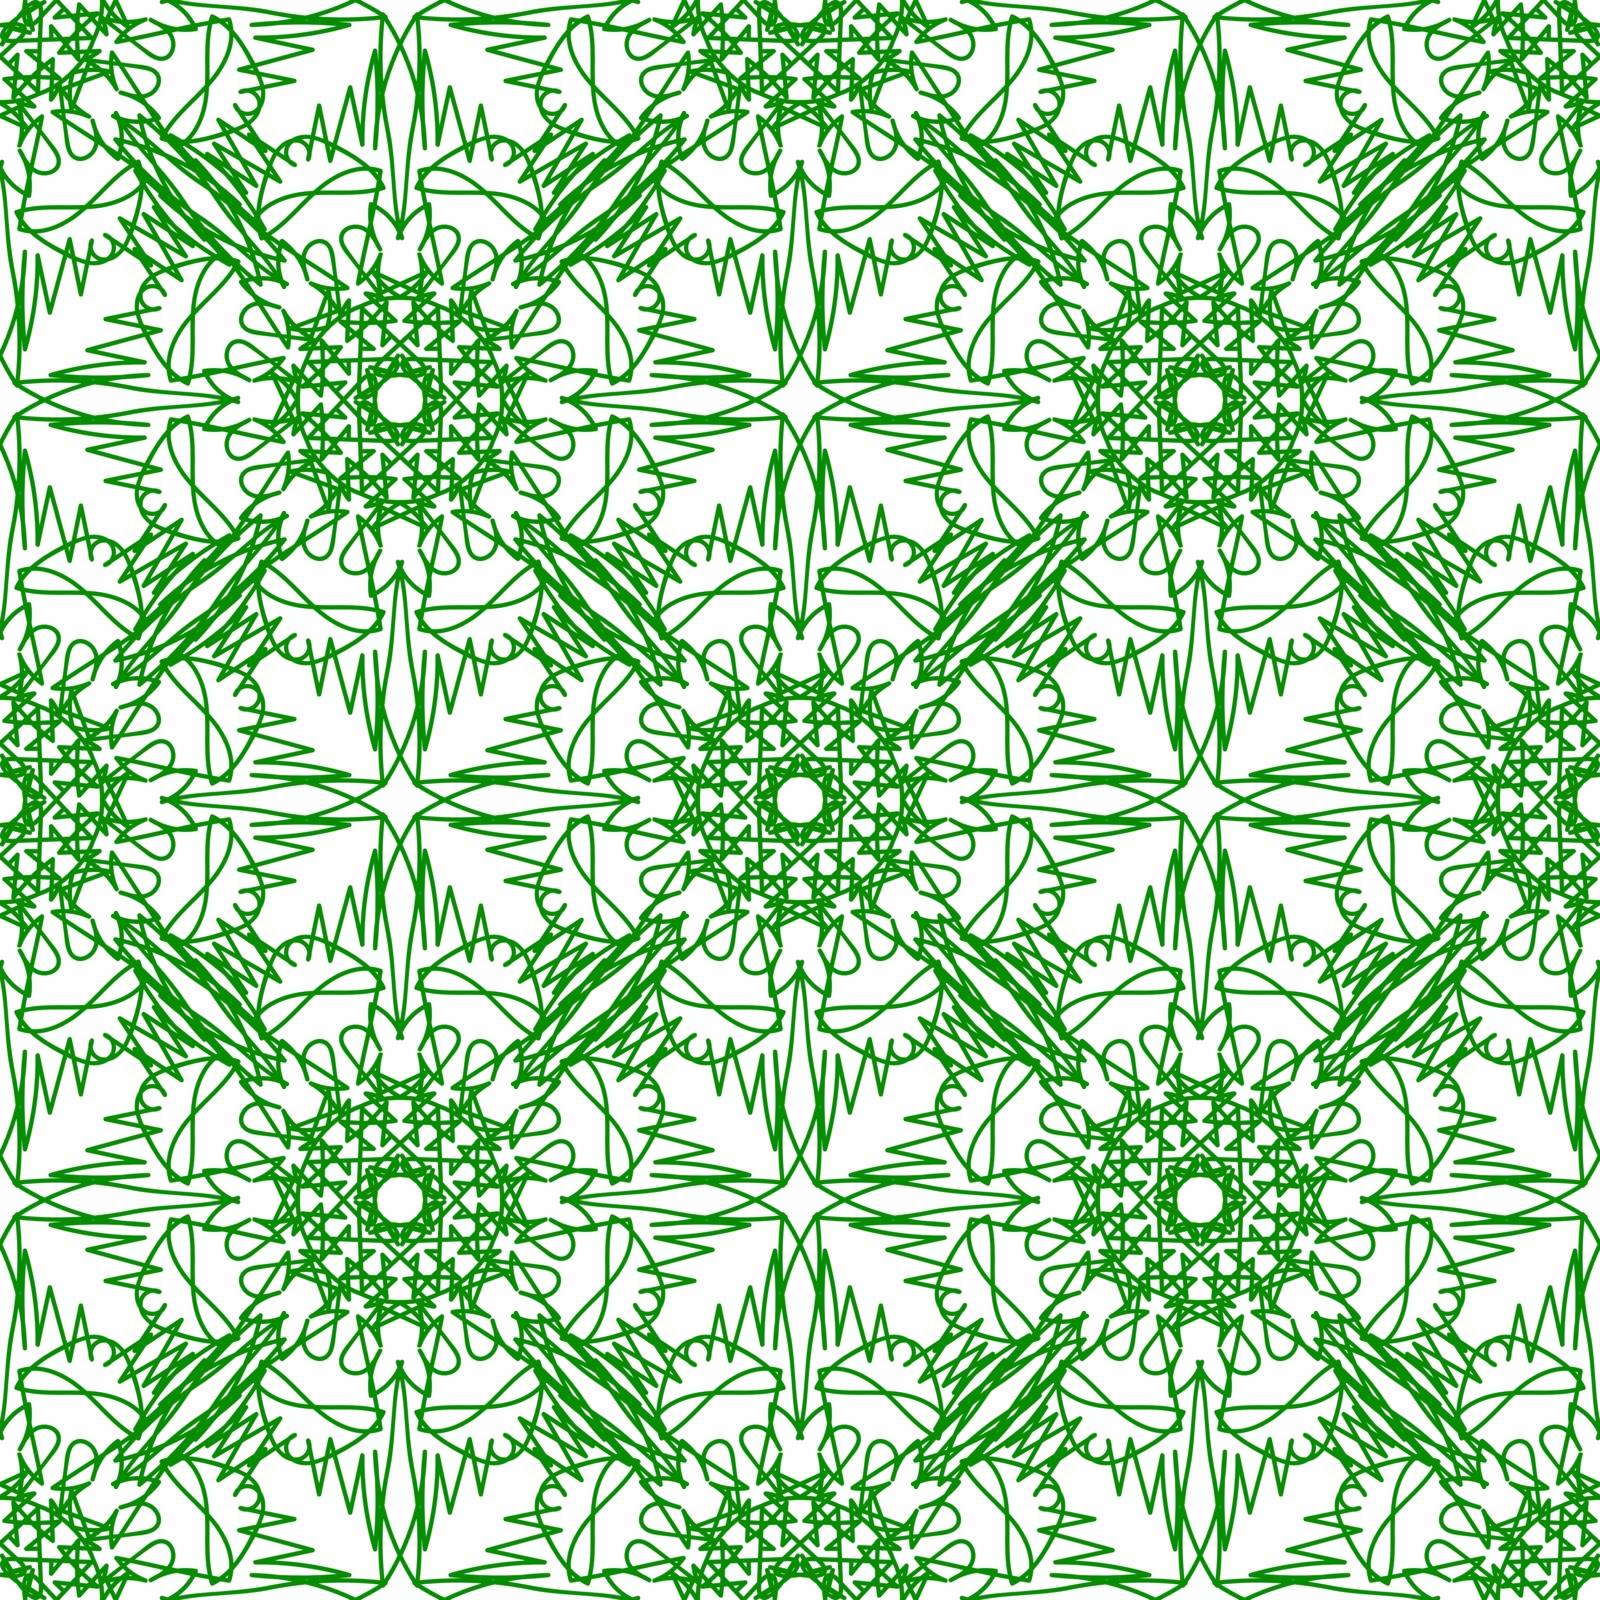 Seamless Texture on Green. Element for Design. Ornamental Backdrop. Pattern Fill. Ornate Floral Decor for Wallpaper. Traditional Decor on Green Background